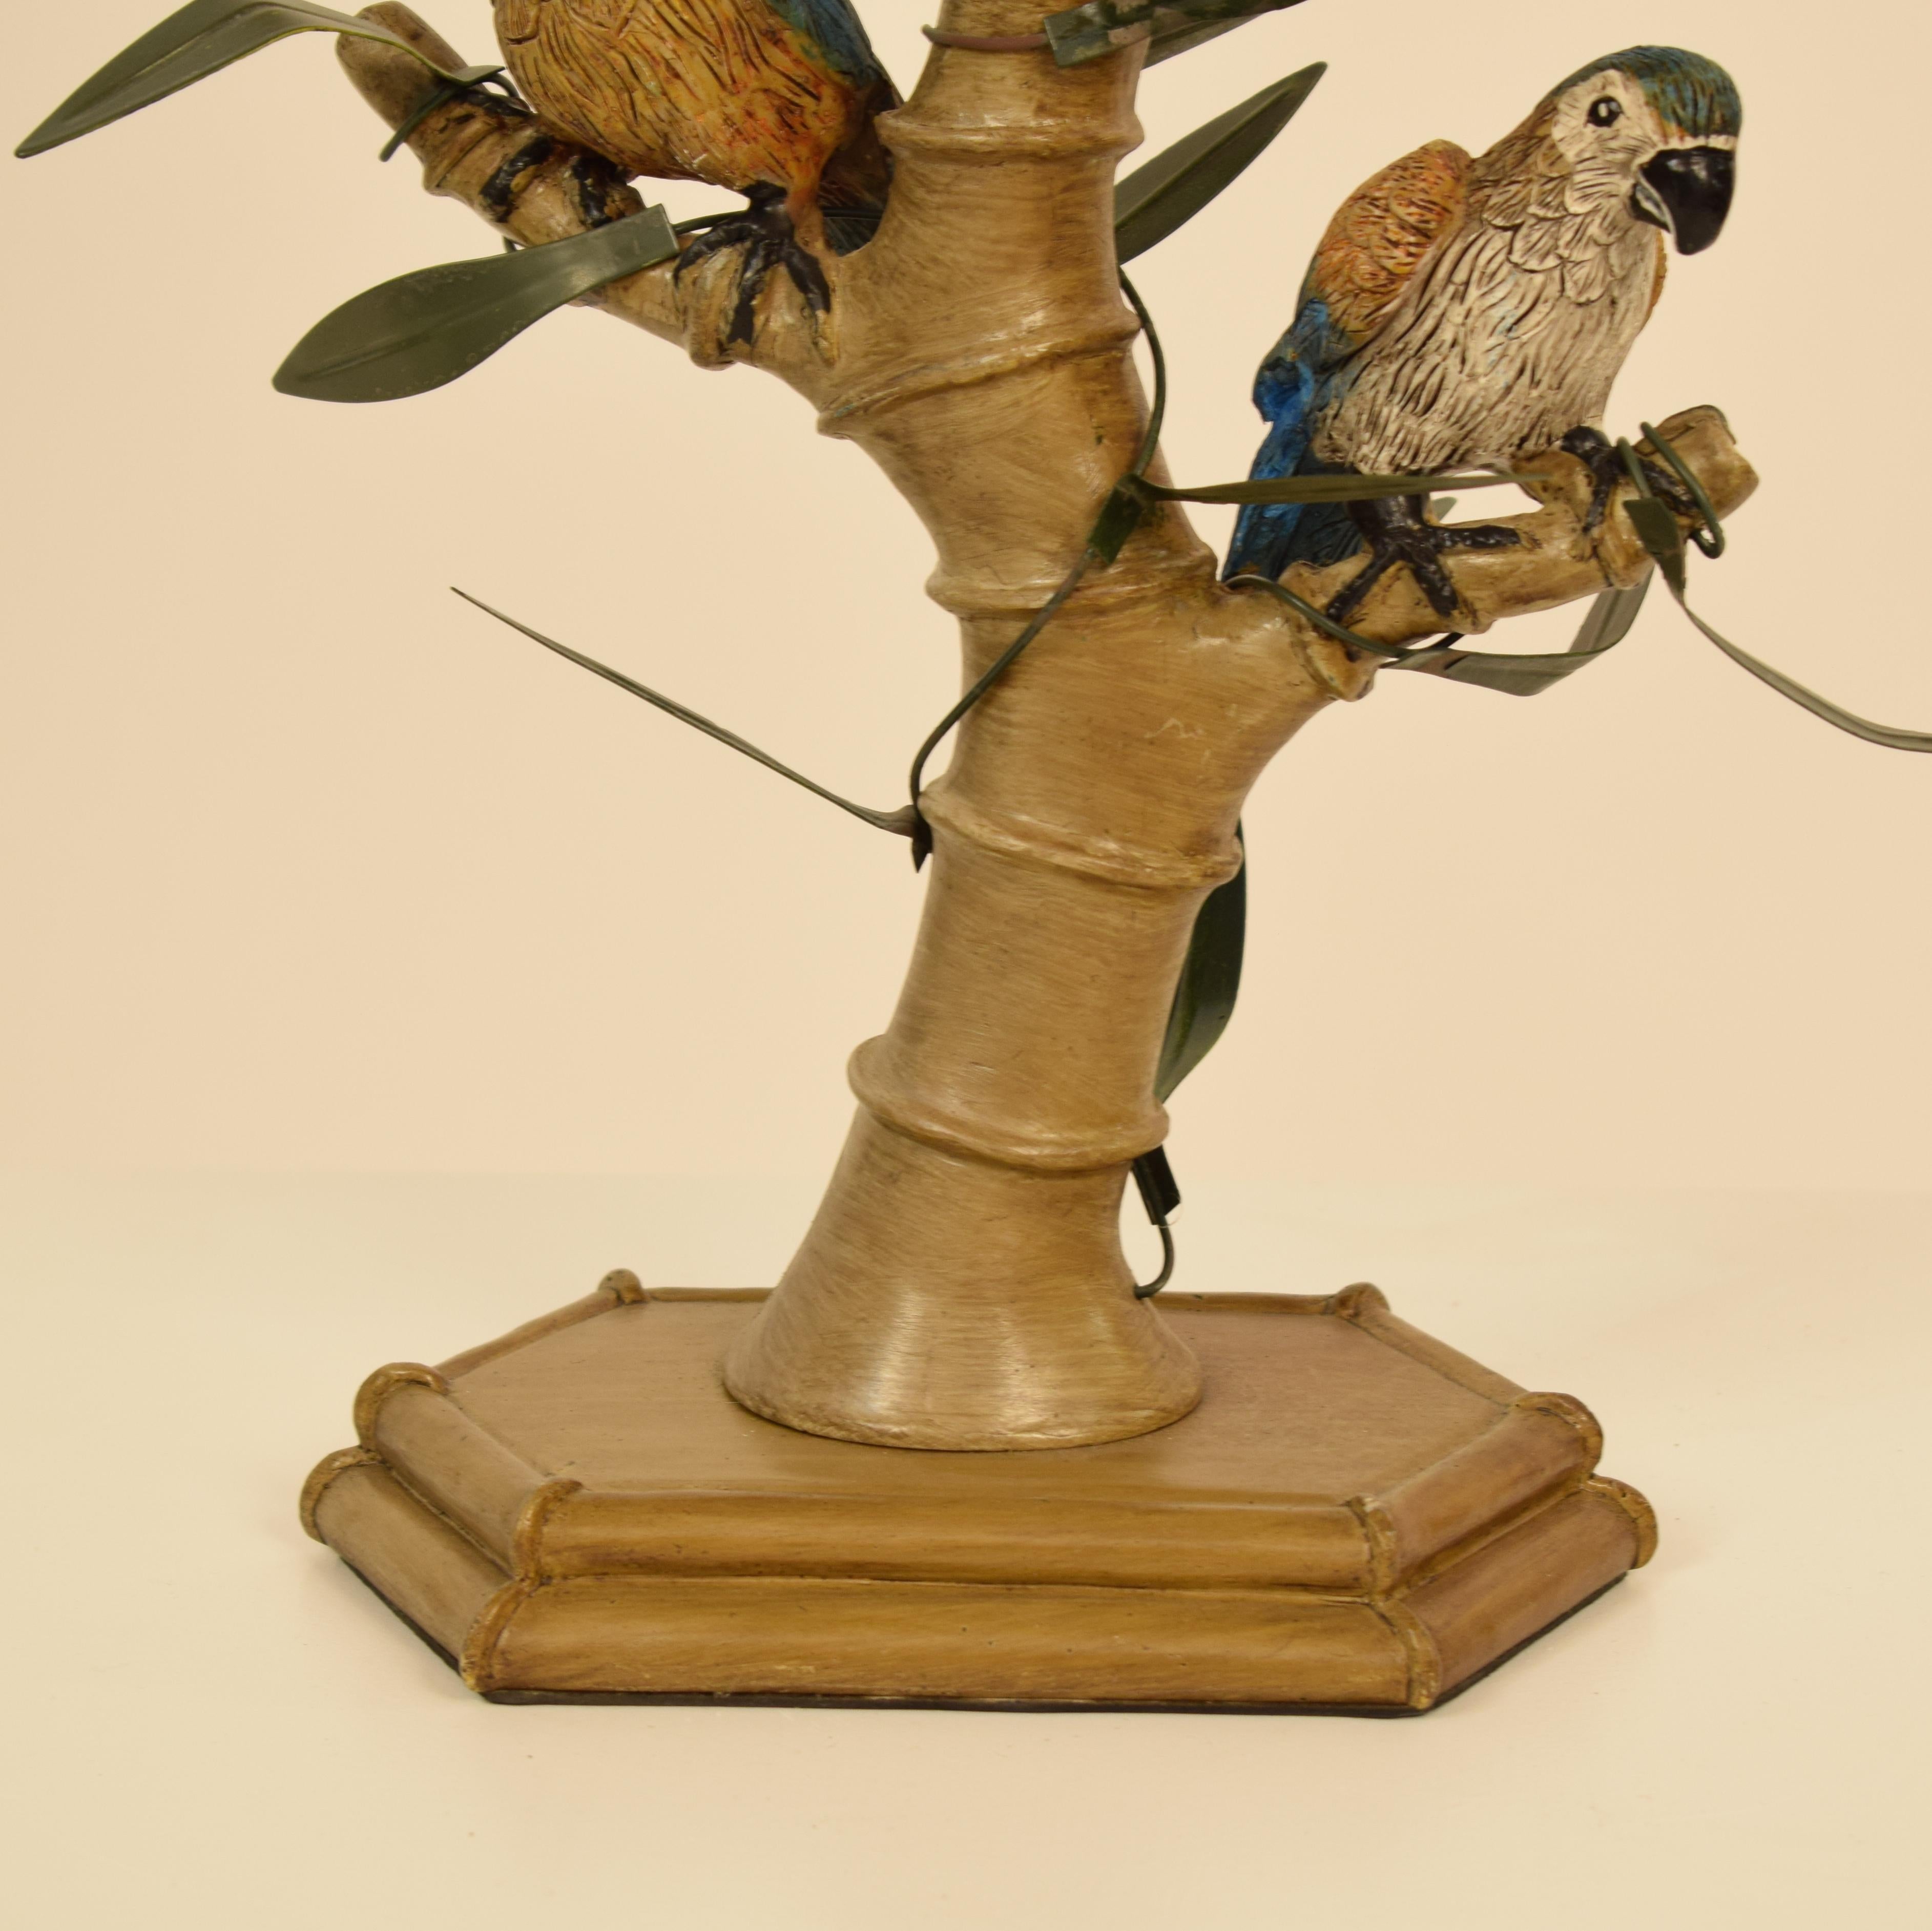 Mid-Century Modern Midcentury Italian Faux Bamboo Table Lamp with Parrots and Bamboo Lamp Shade